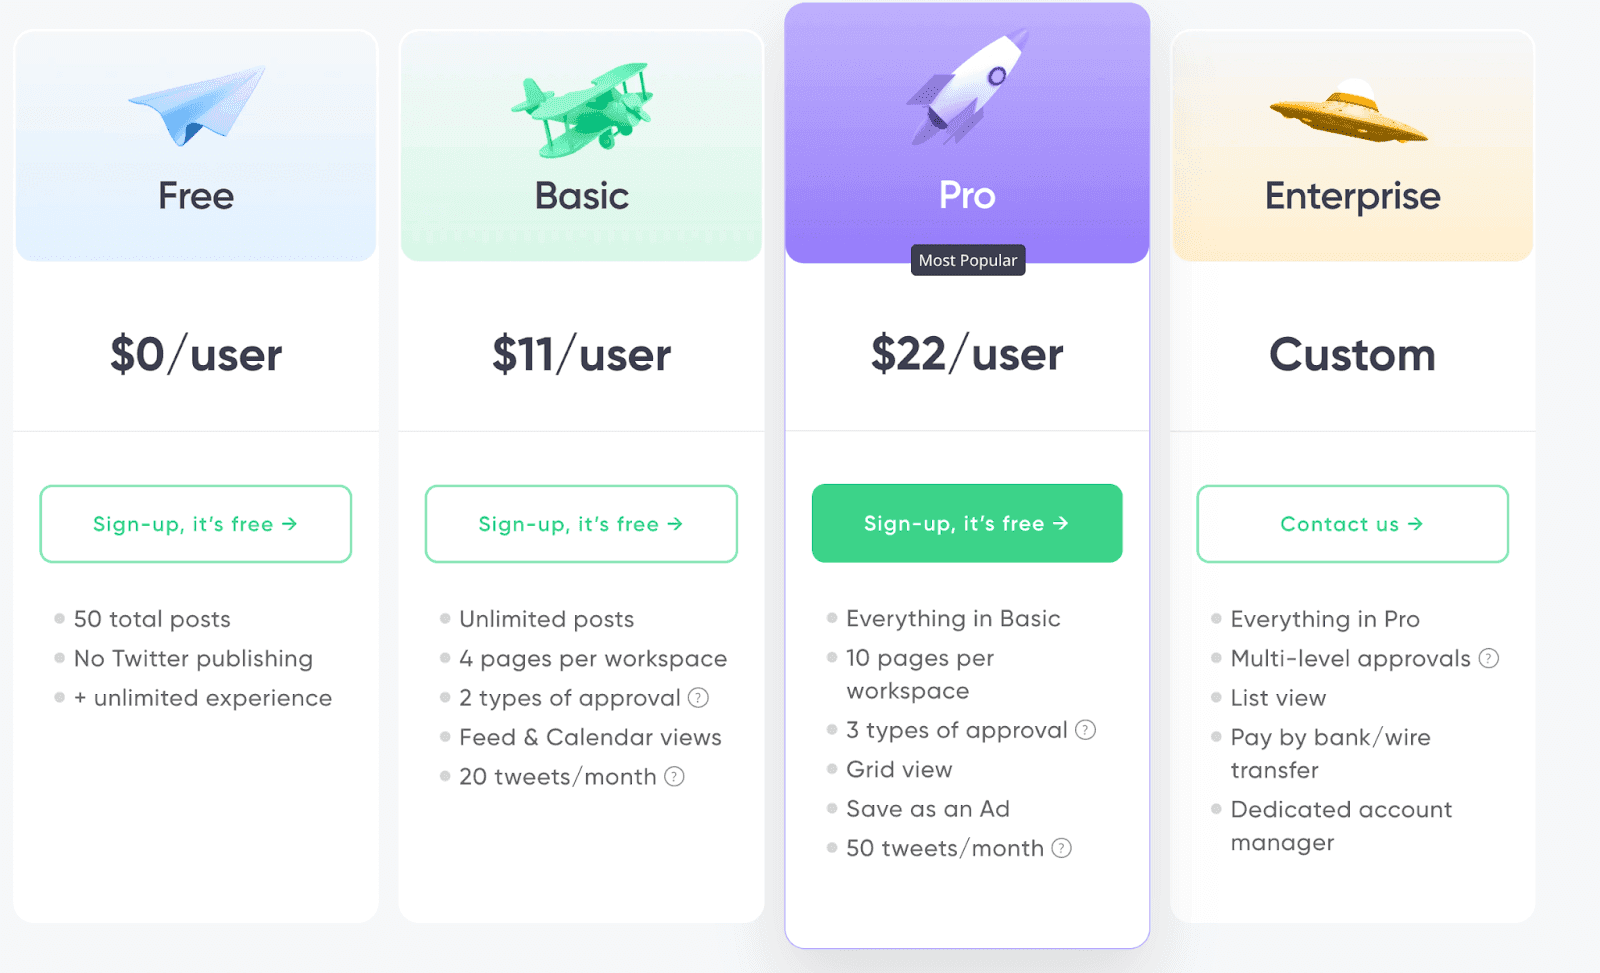 Planable Pricing Page